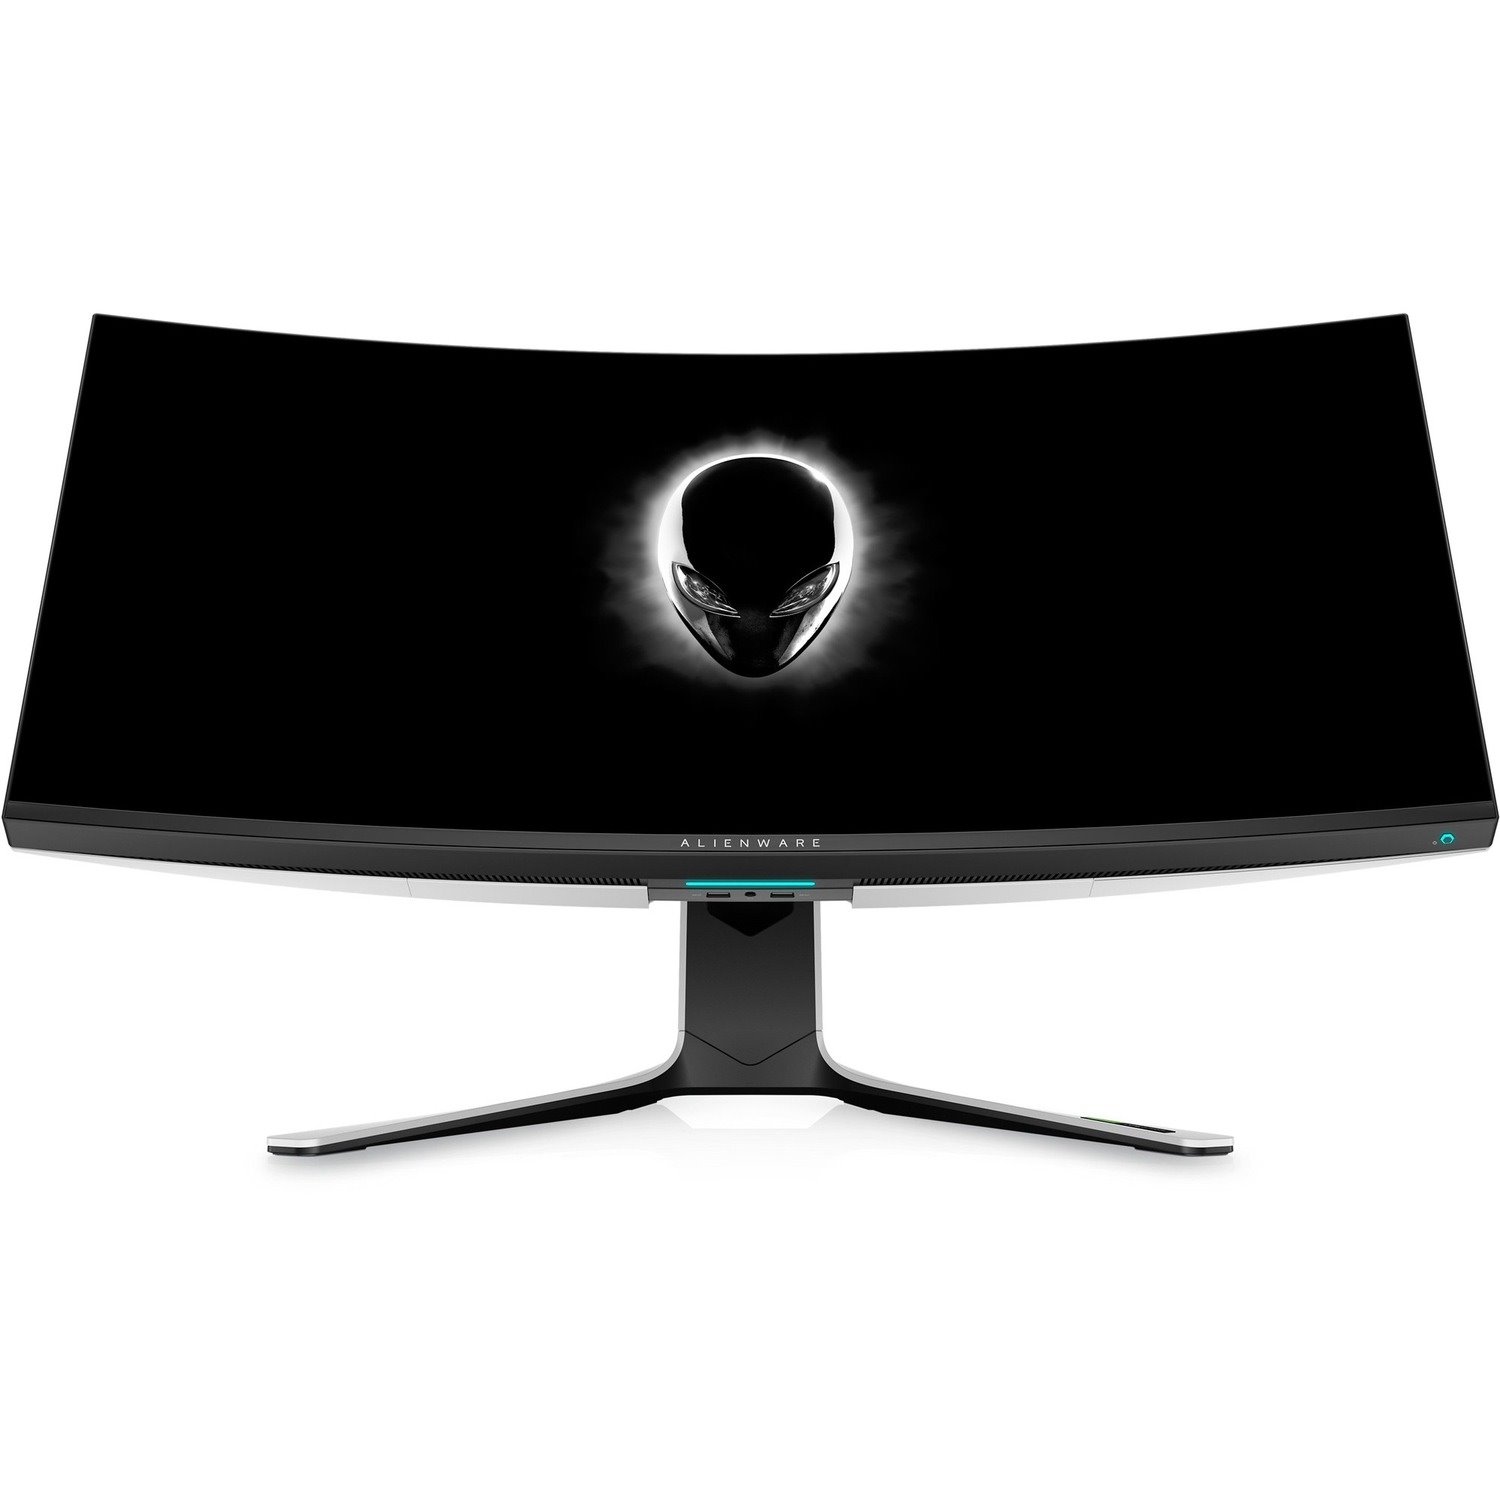 Alienware AW3821DW 38" Class UW-QHD+ Curved Screen Gaming LCD Monitor - 21:9